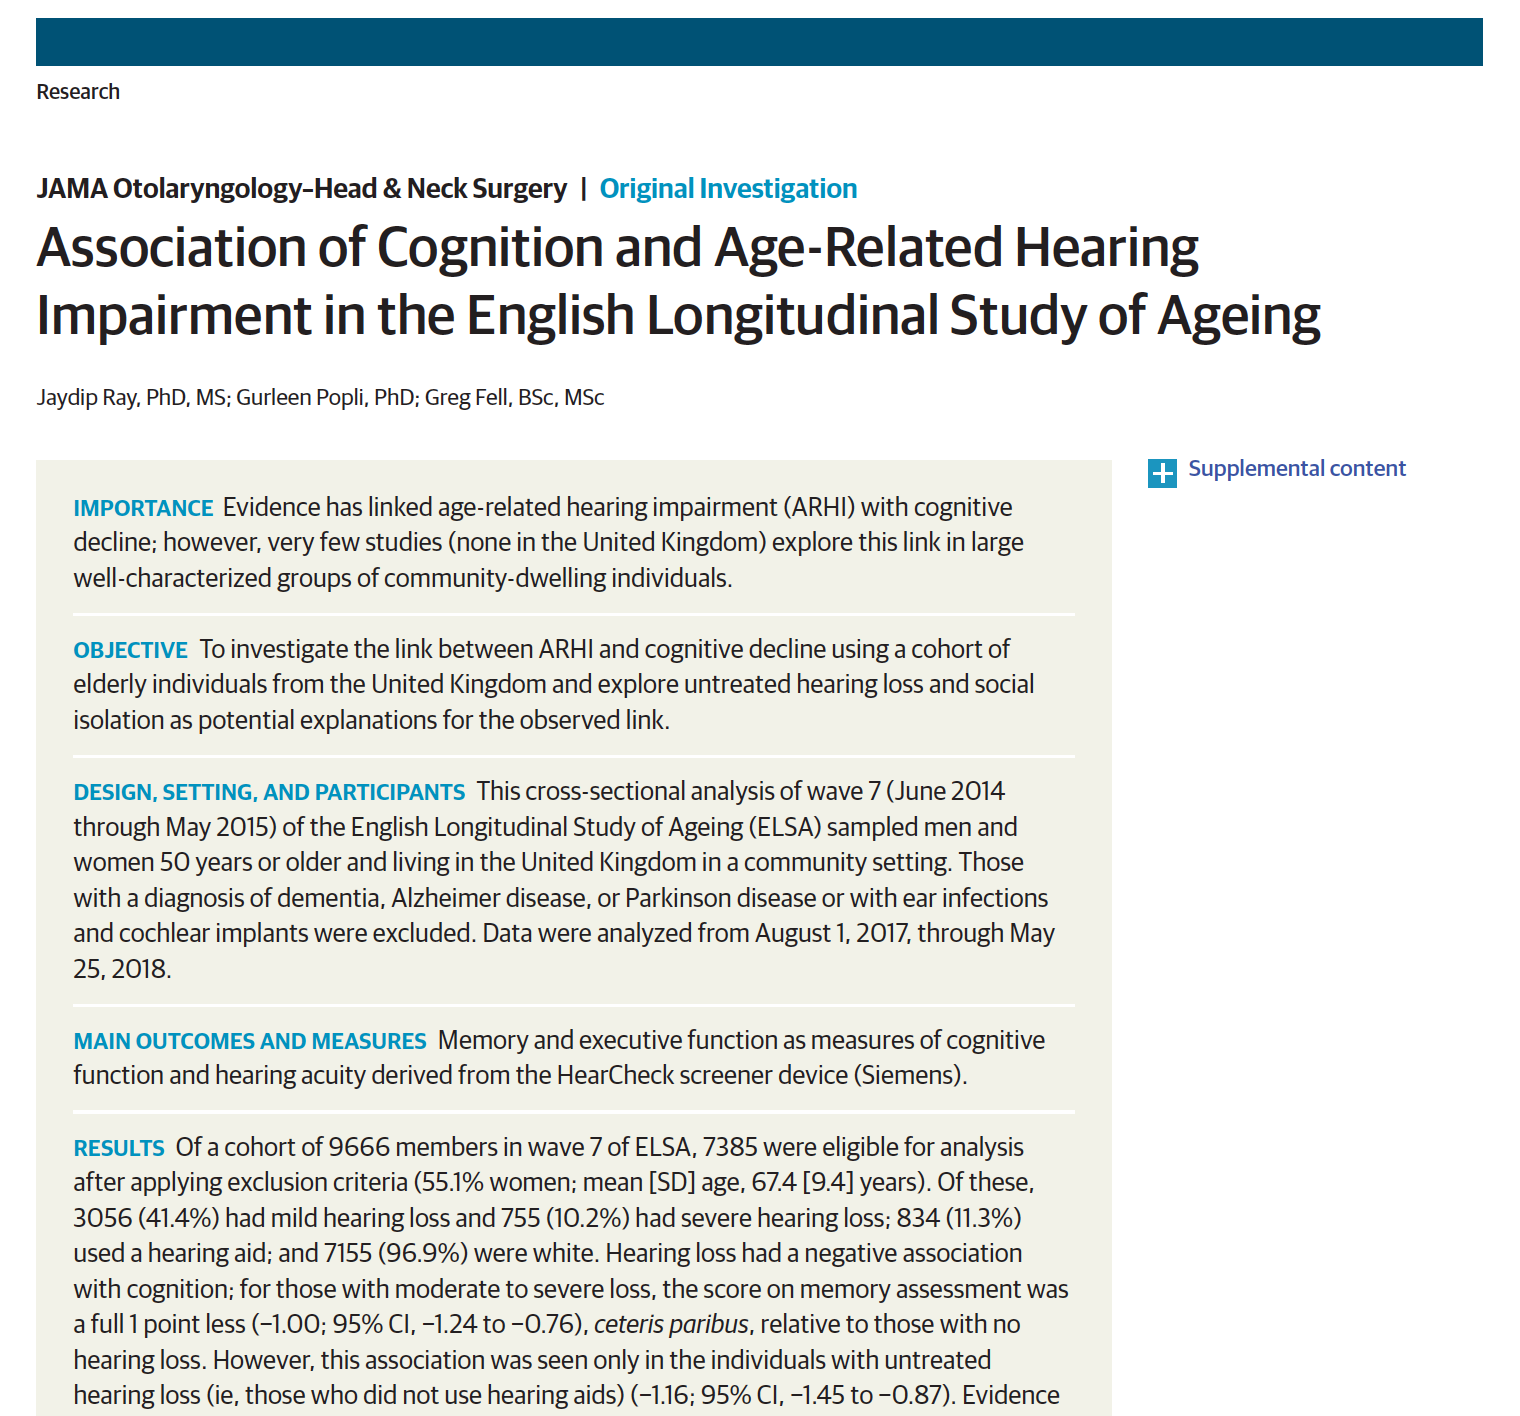 cognition and age-related hearing impairment